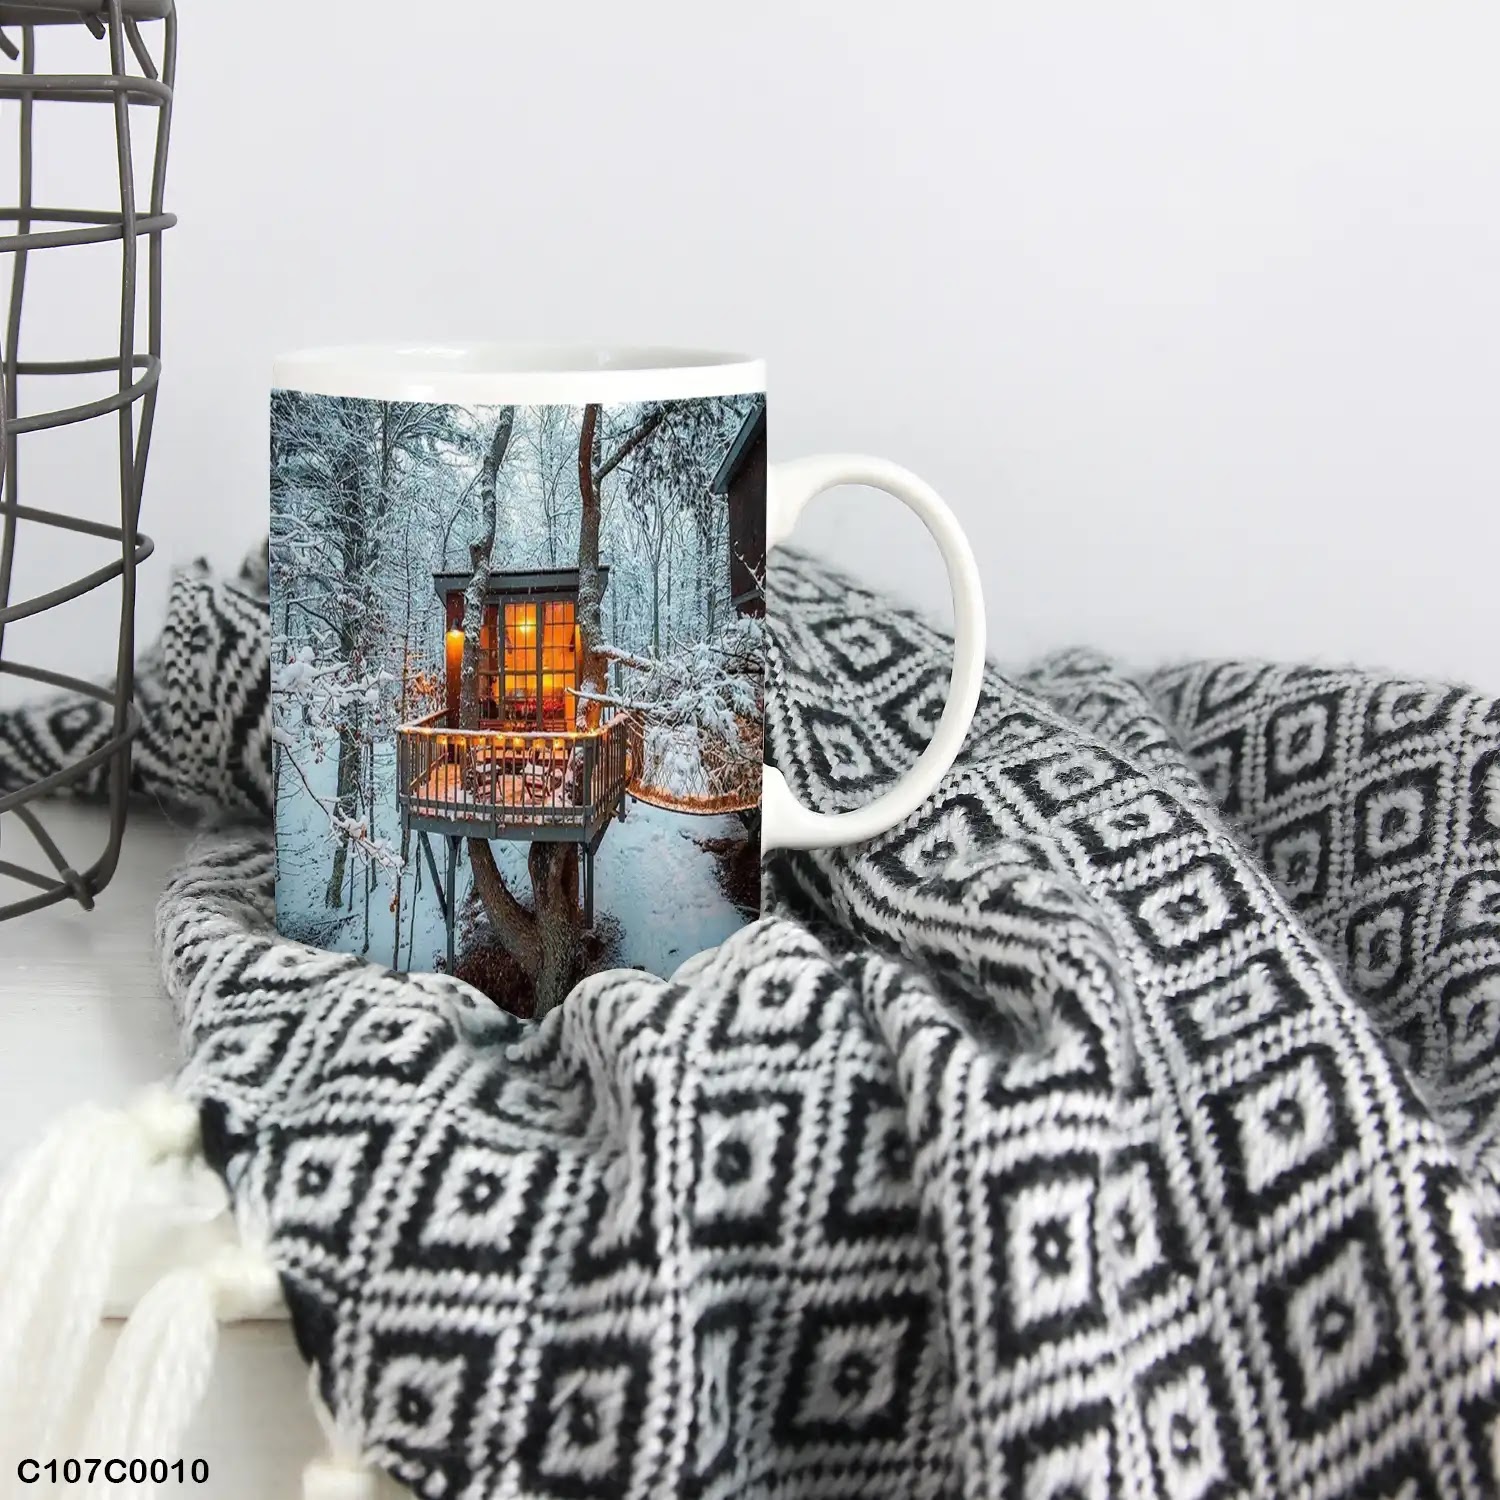 A mug (cup) printed with an image of a cottage in snowy forest